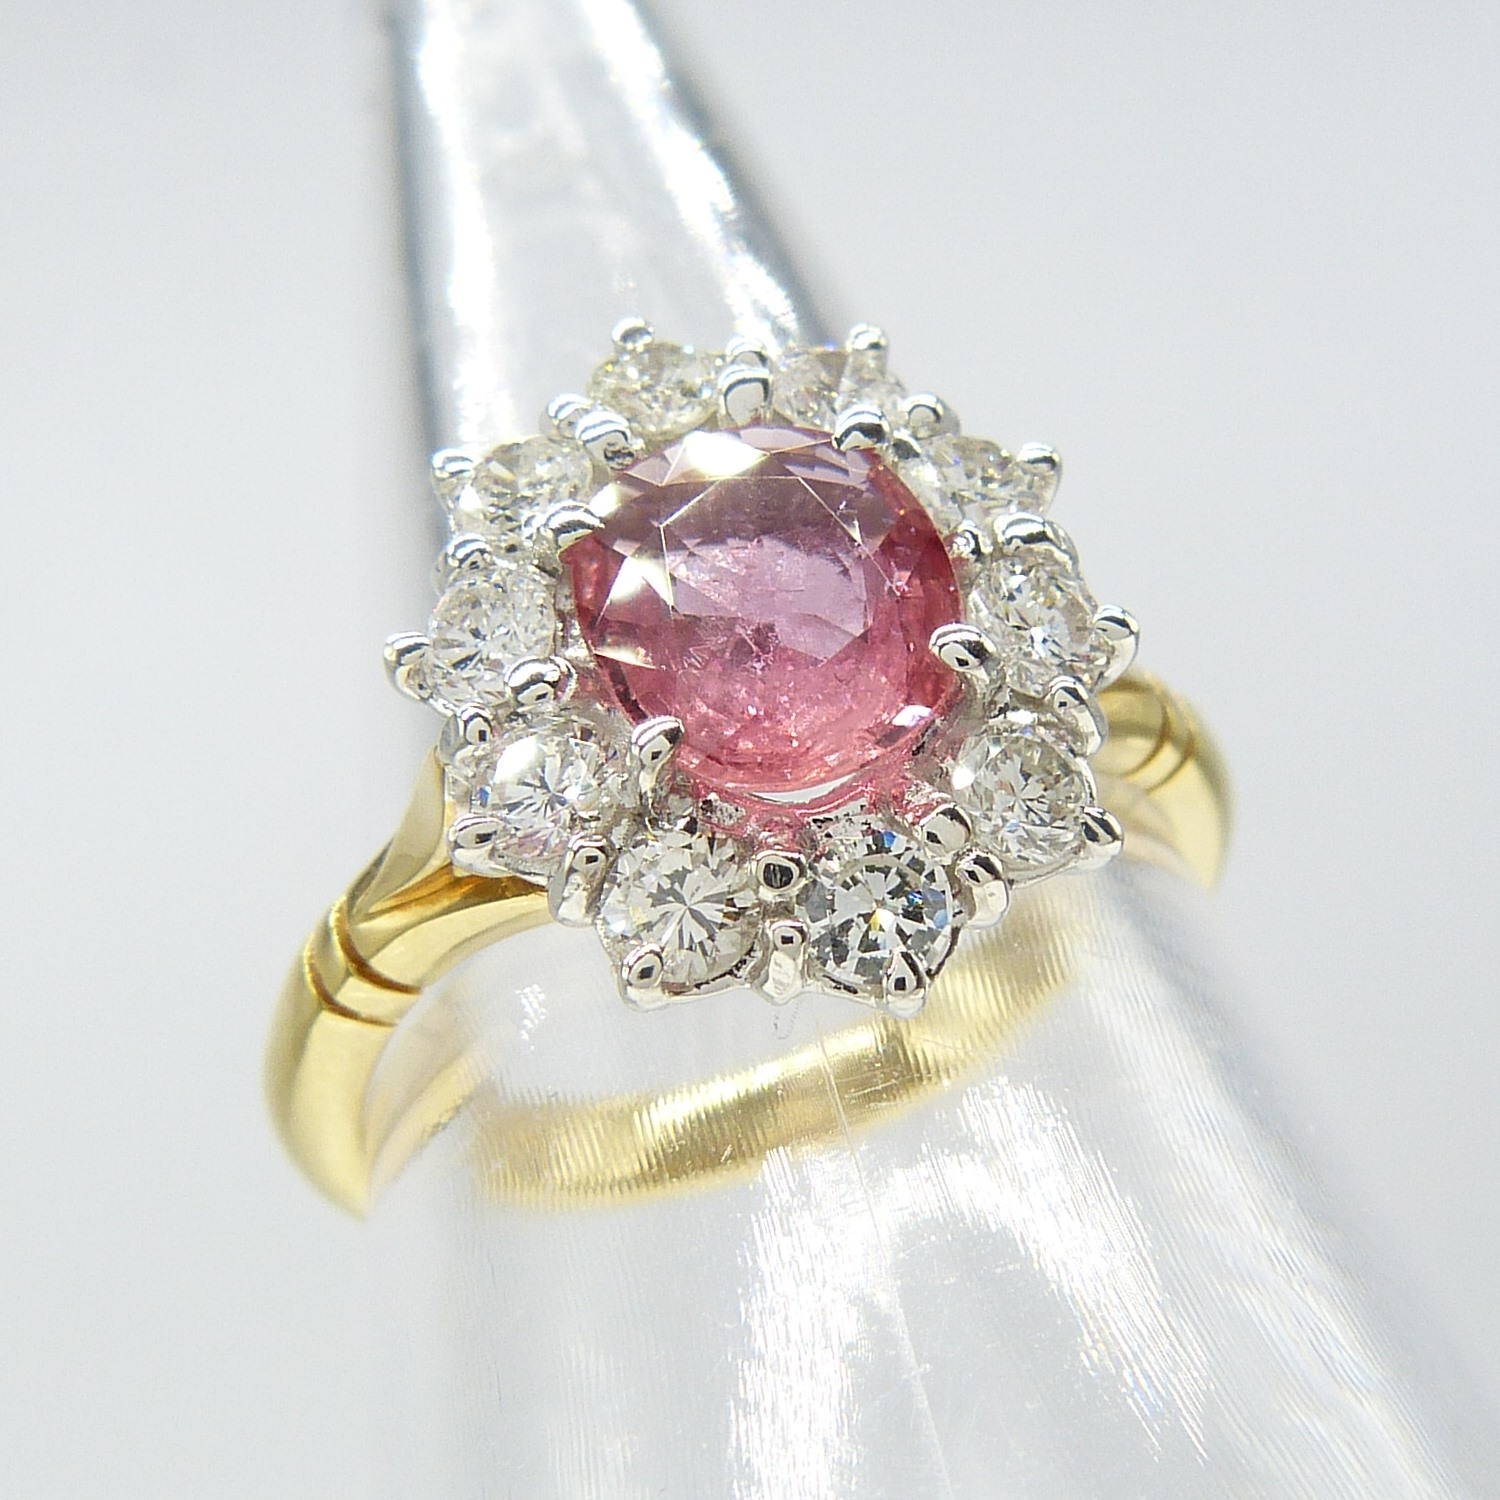 A pinkish-red natural Ruby and Diamond cluster ring in 18ct yellow and white Gold - Image 4 of 10